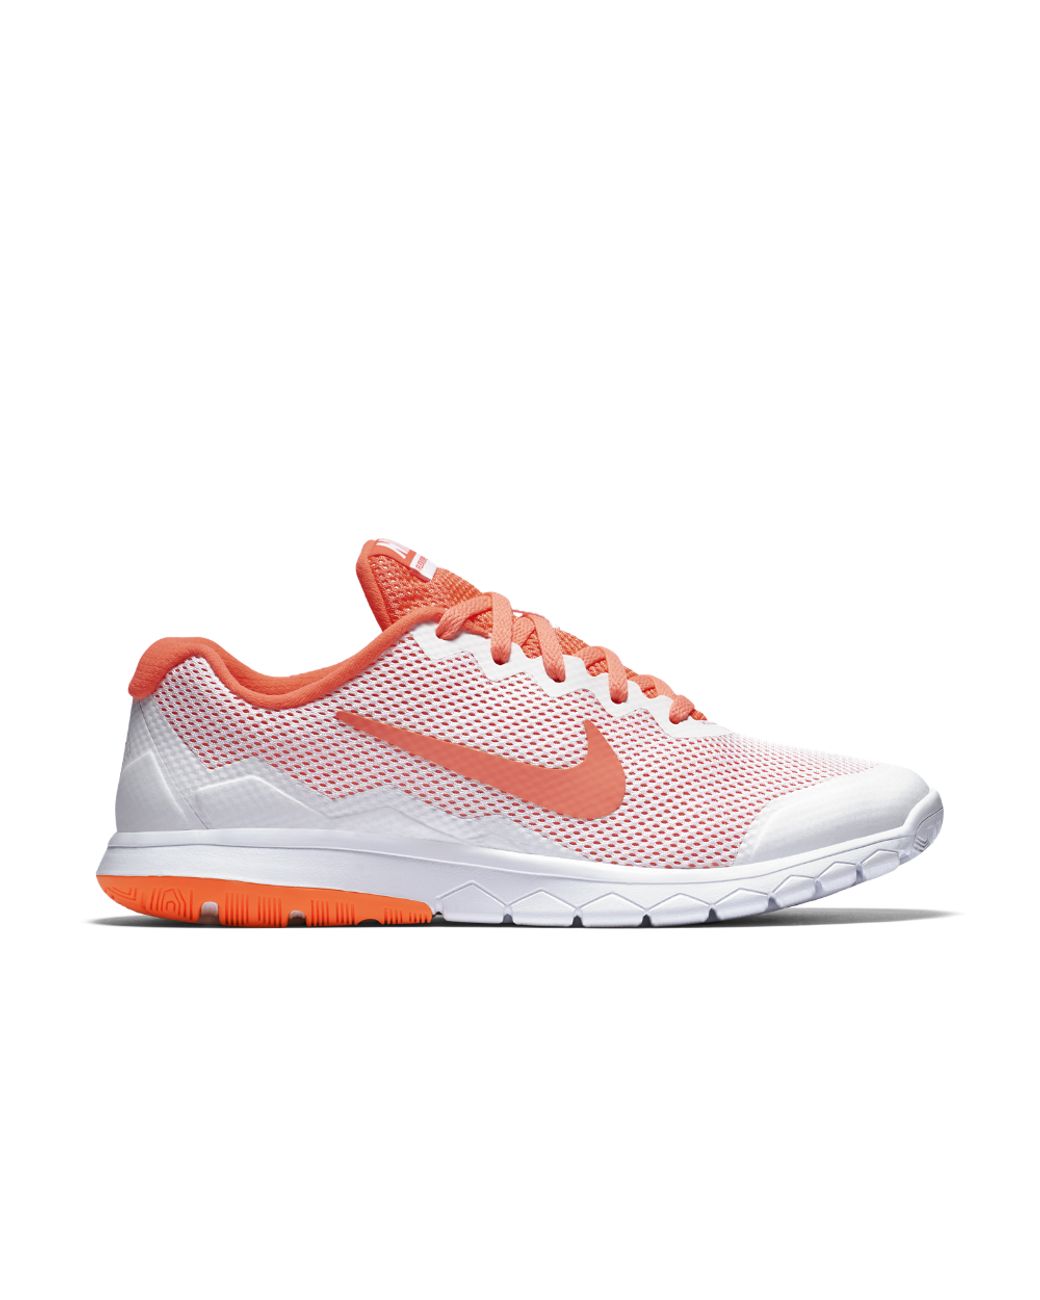 Nike Leather Air Max 90 Ultra Plush in Salmon Pink (Pink) | Lyst